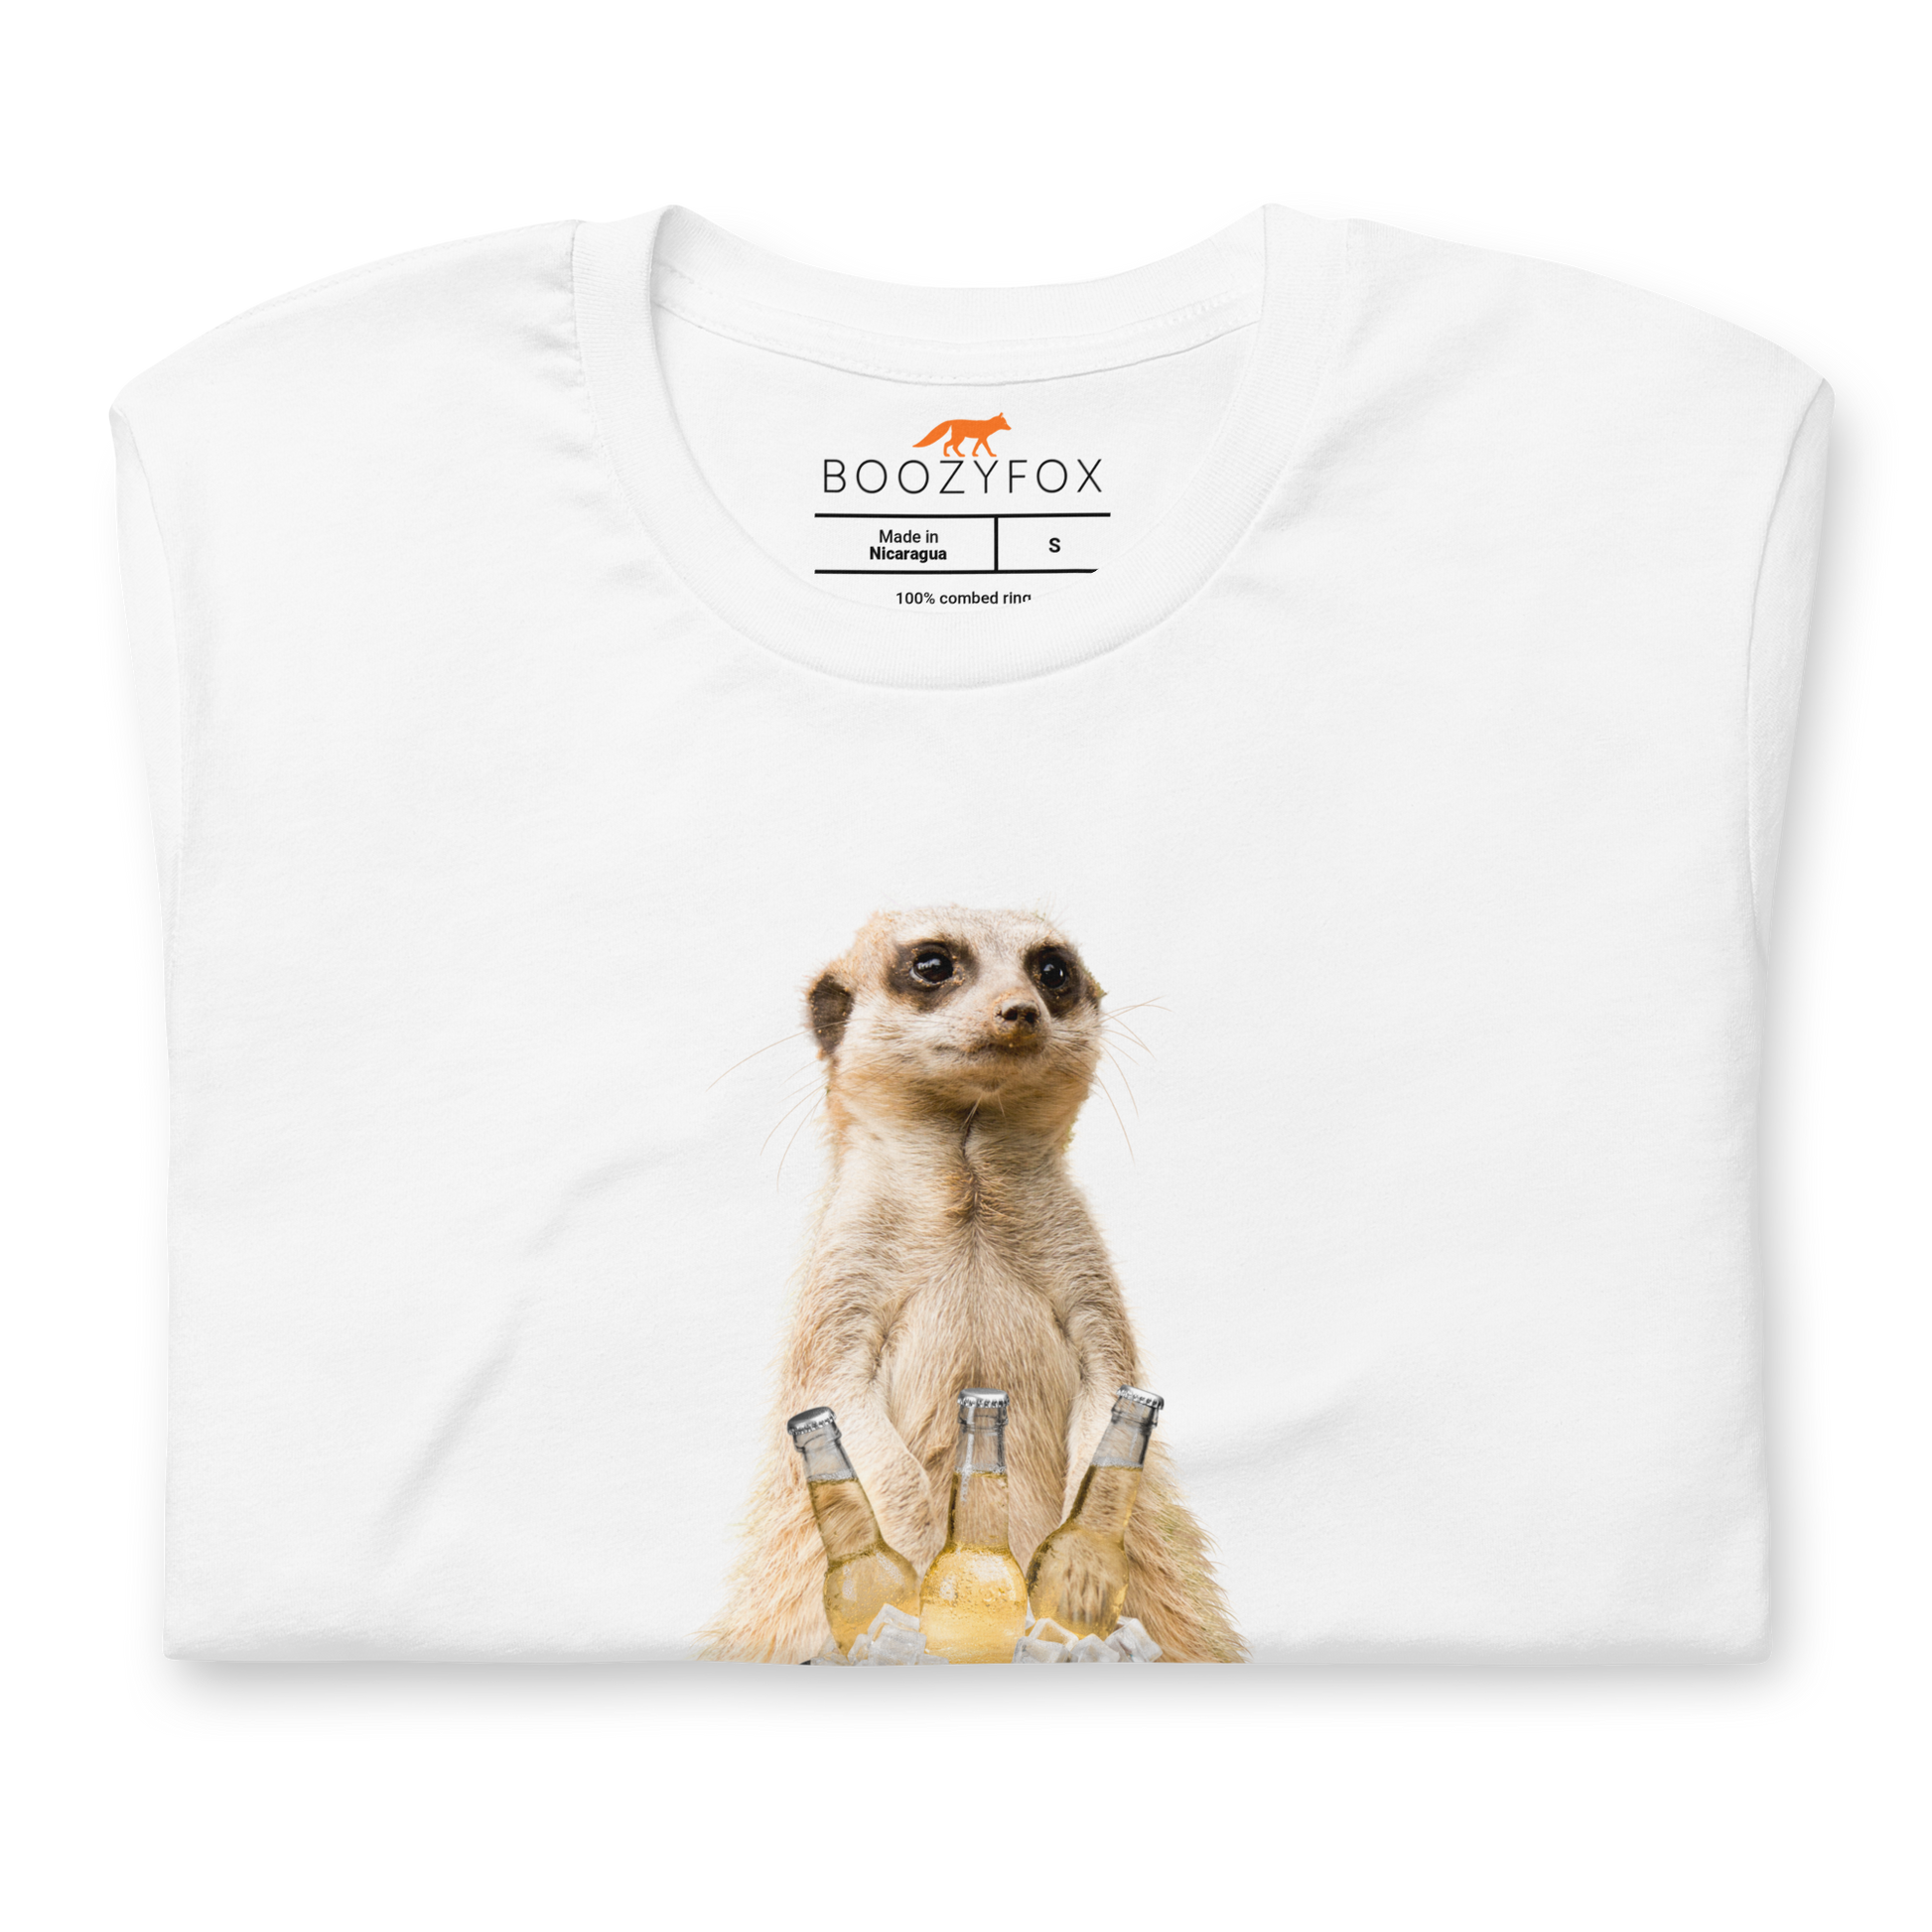 Front Details of a White Premium Meerkat T-Shirt featuring a hilarious Beerkat graphic on the chest - Funny Graphic Meerkat Tees - Boozy Fox